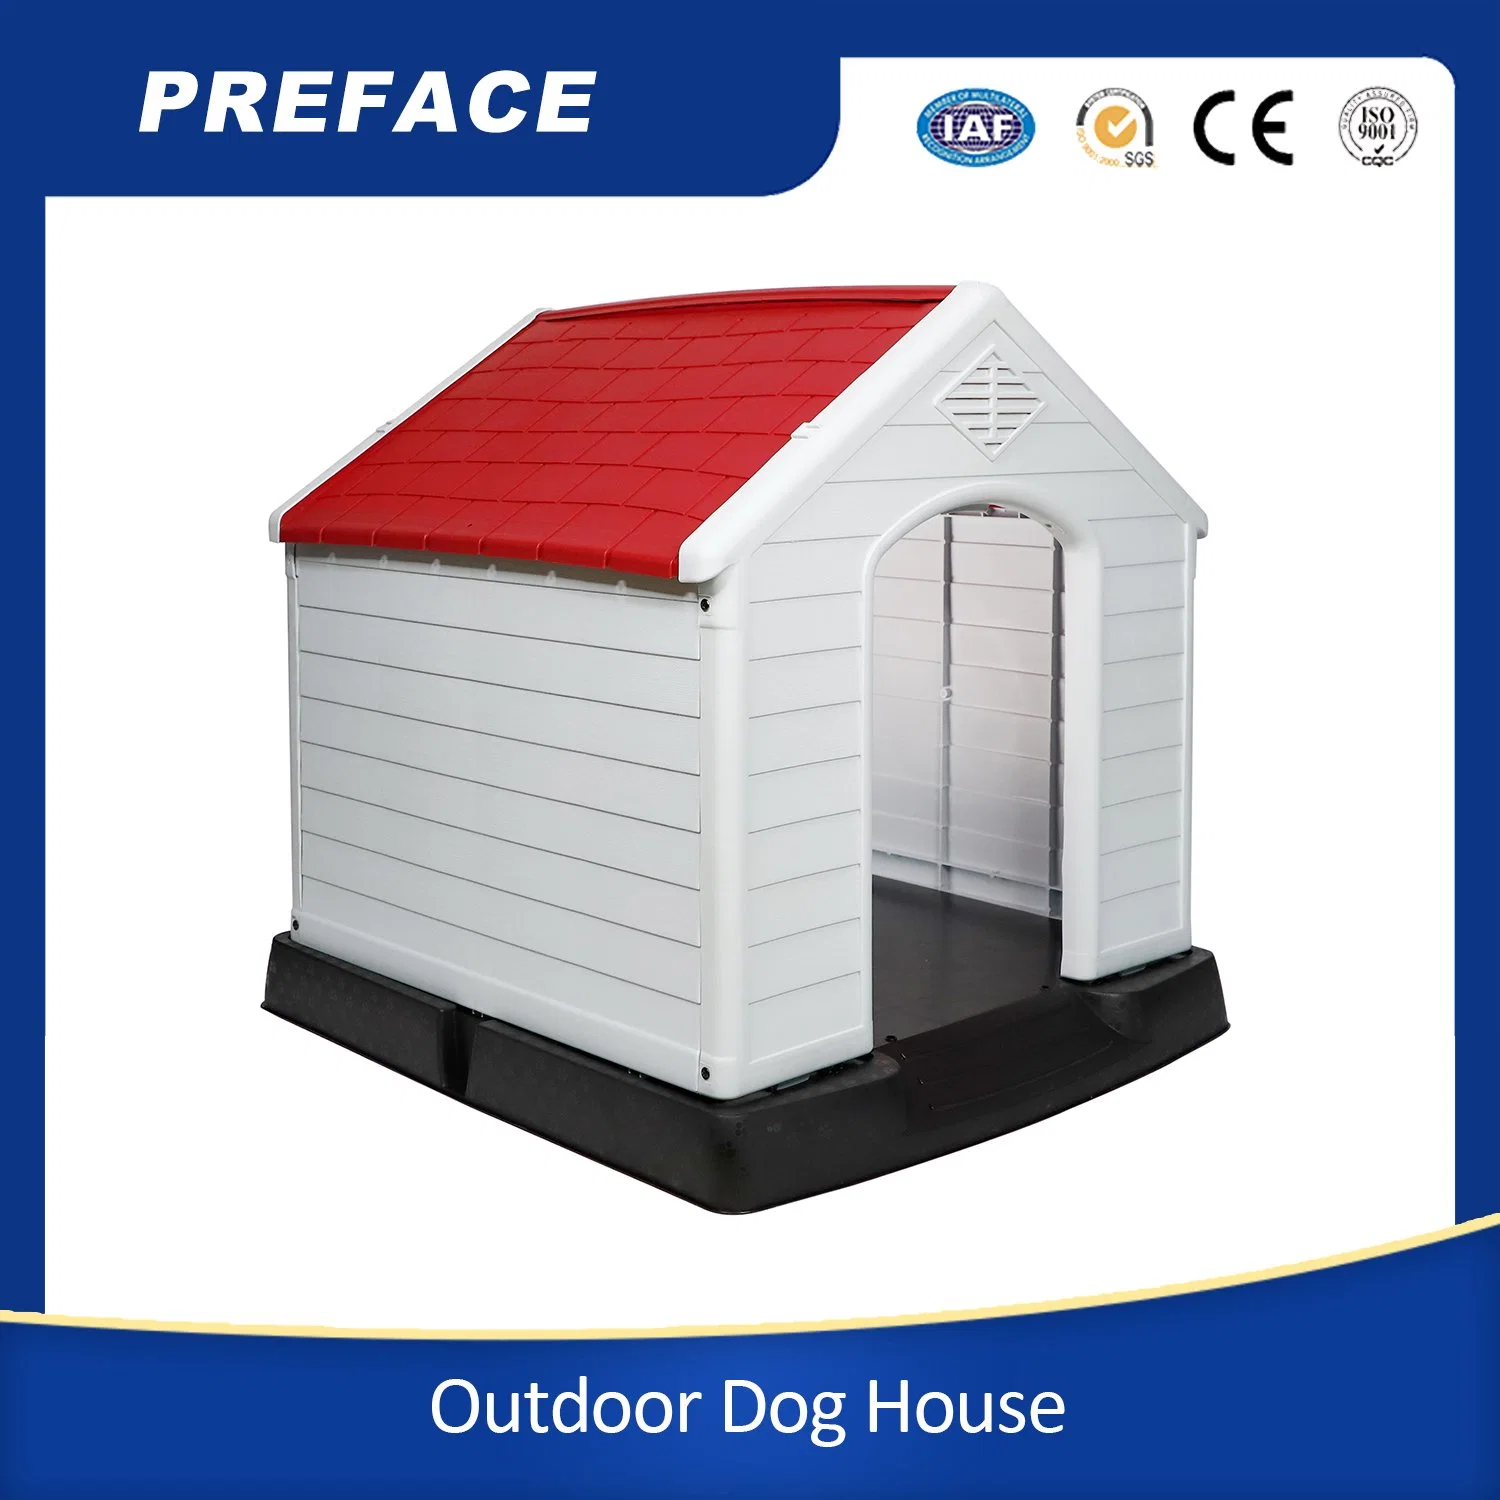 Waterproof and Ventilated Pet Dog Kennel All Weather Dog House Outdoor Plastic Pet Dog House